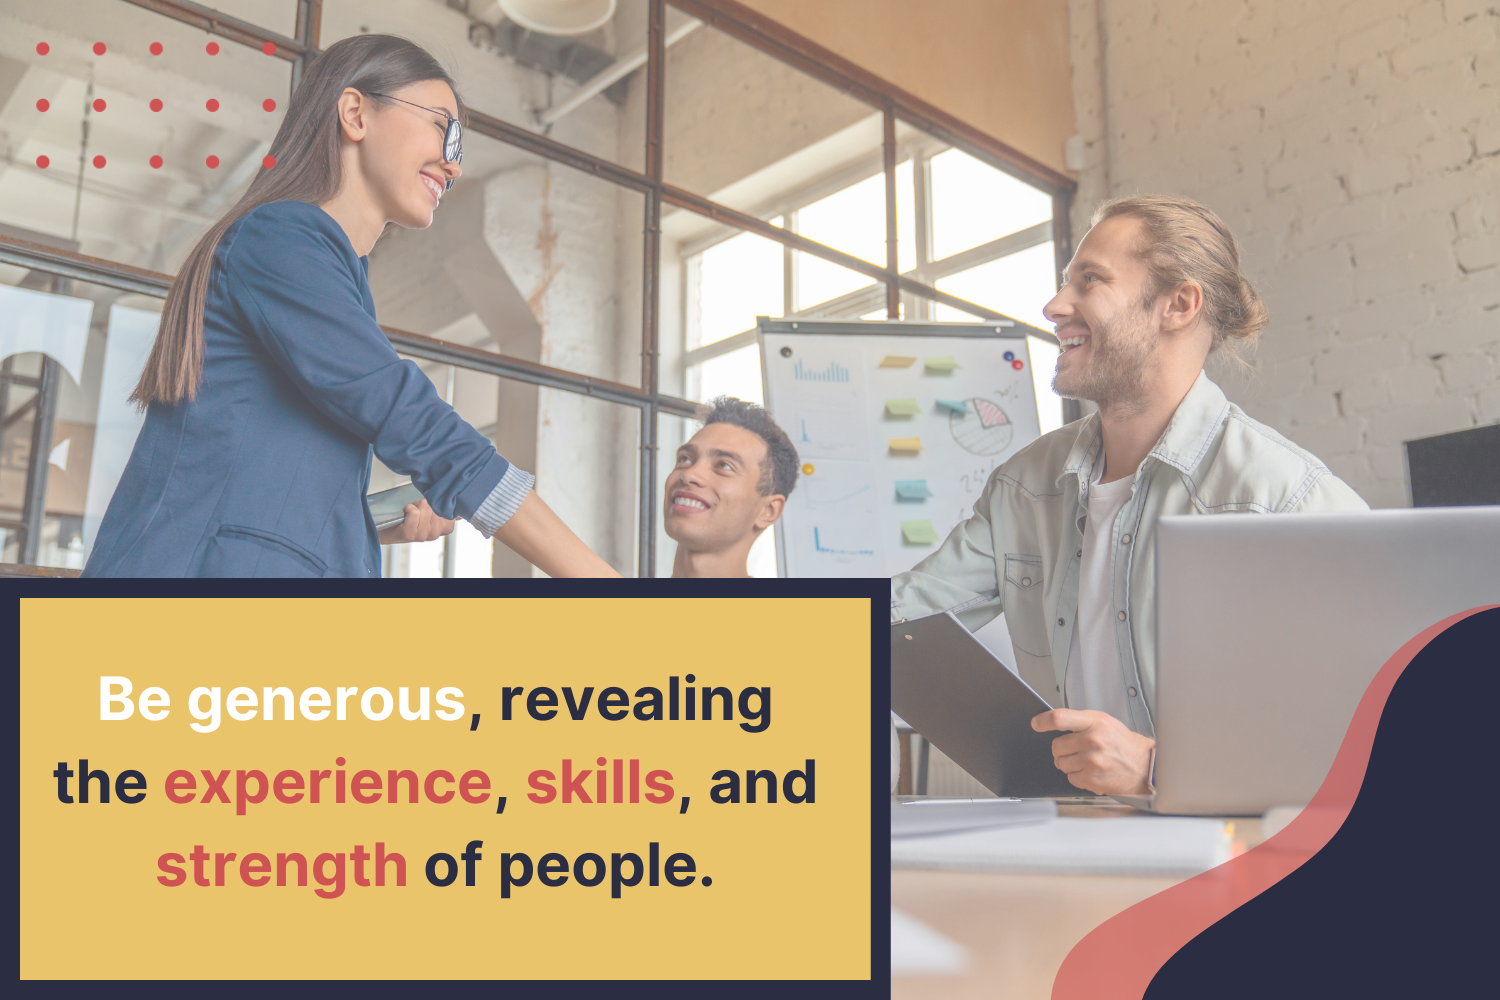 Be generous, revealing the experience, skills, and strength of people